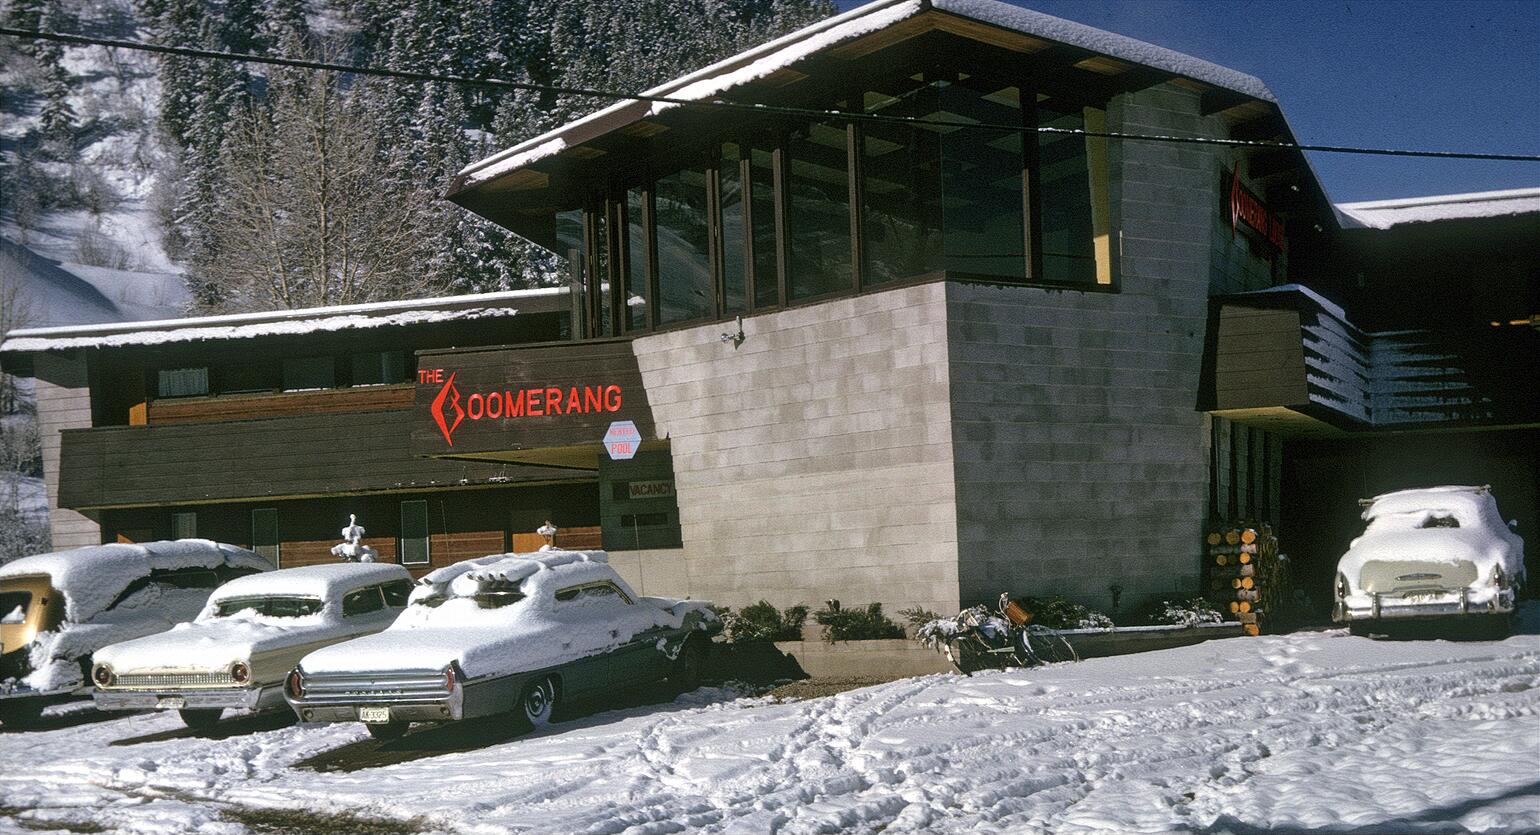 Winter 1962-63 in Aspen, Colorado. Boomerang Lodge, designed by owner Charlie Paterson, a Frank Lloyd Wright-trained architect (and ski instructor). The vehicle on the left is a Cadillac hearse used as a lodge limo! View full size.